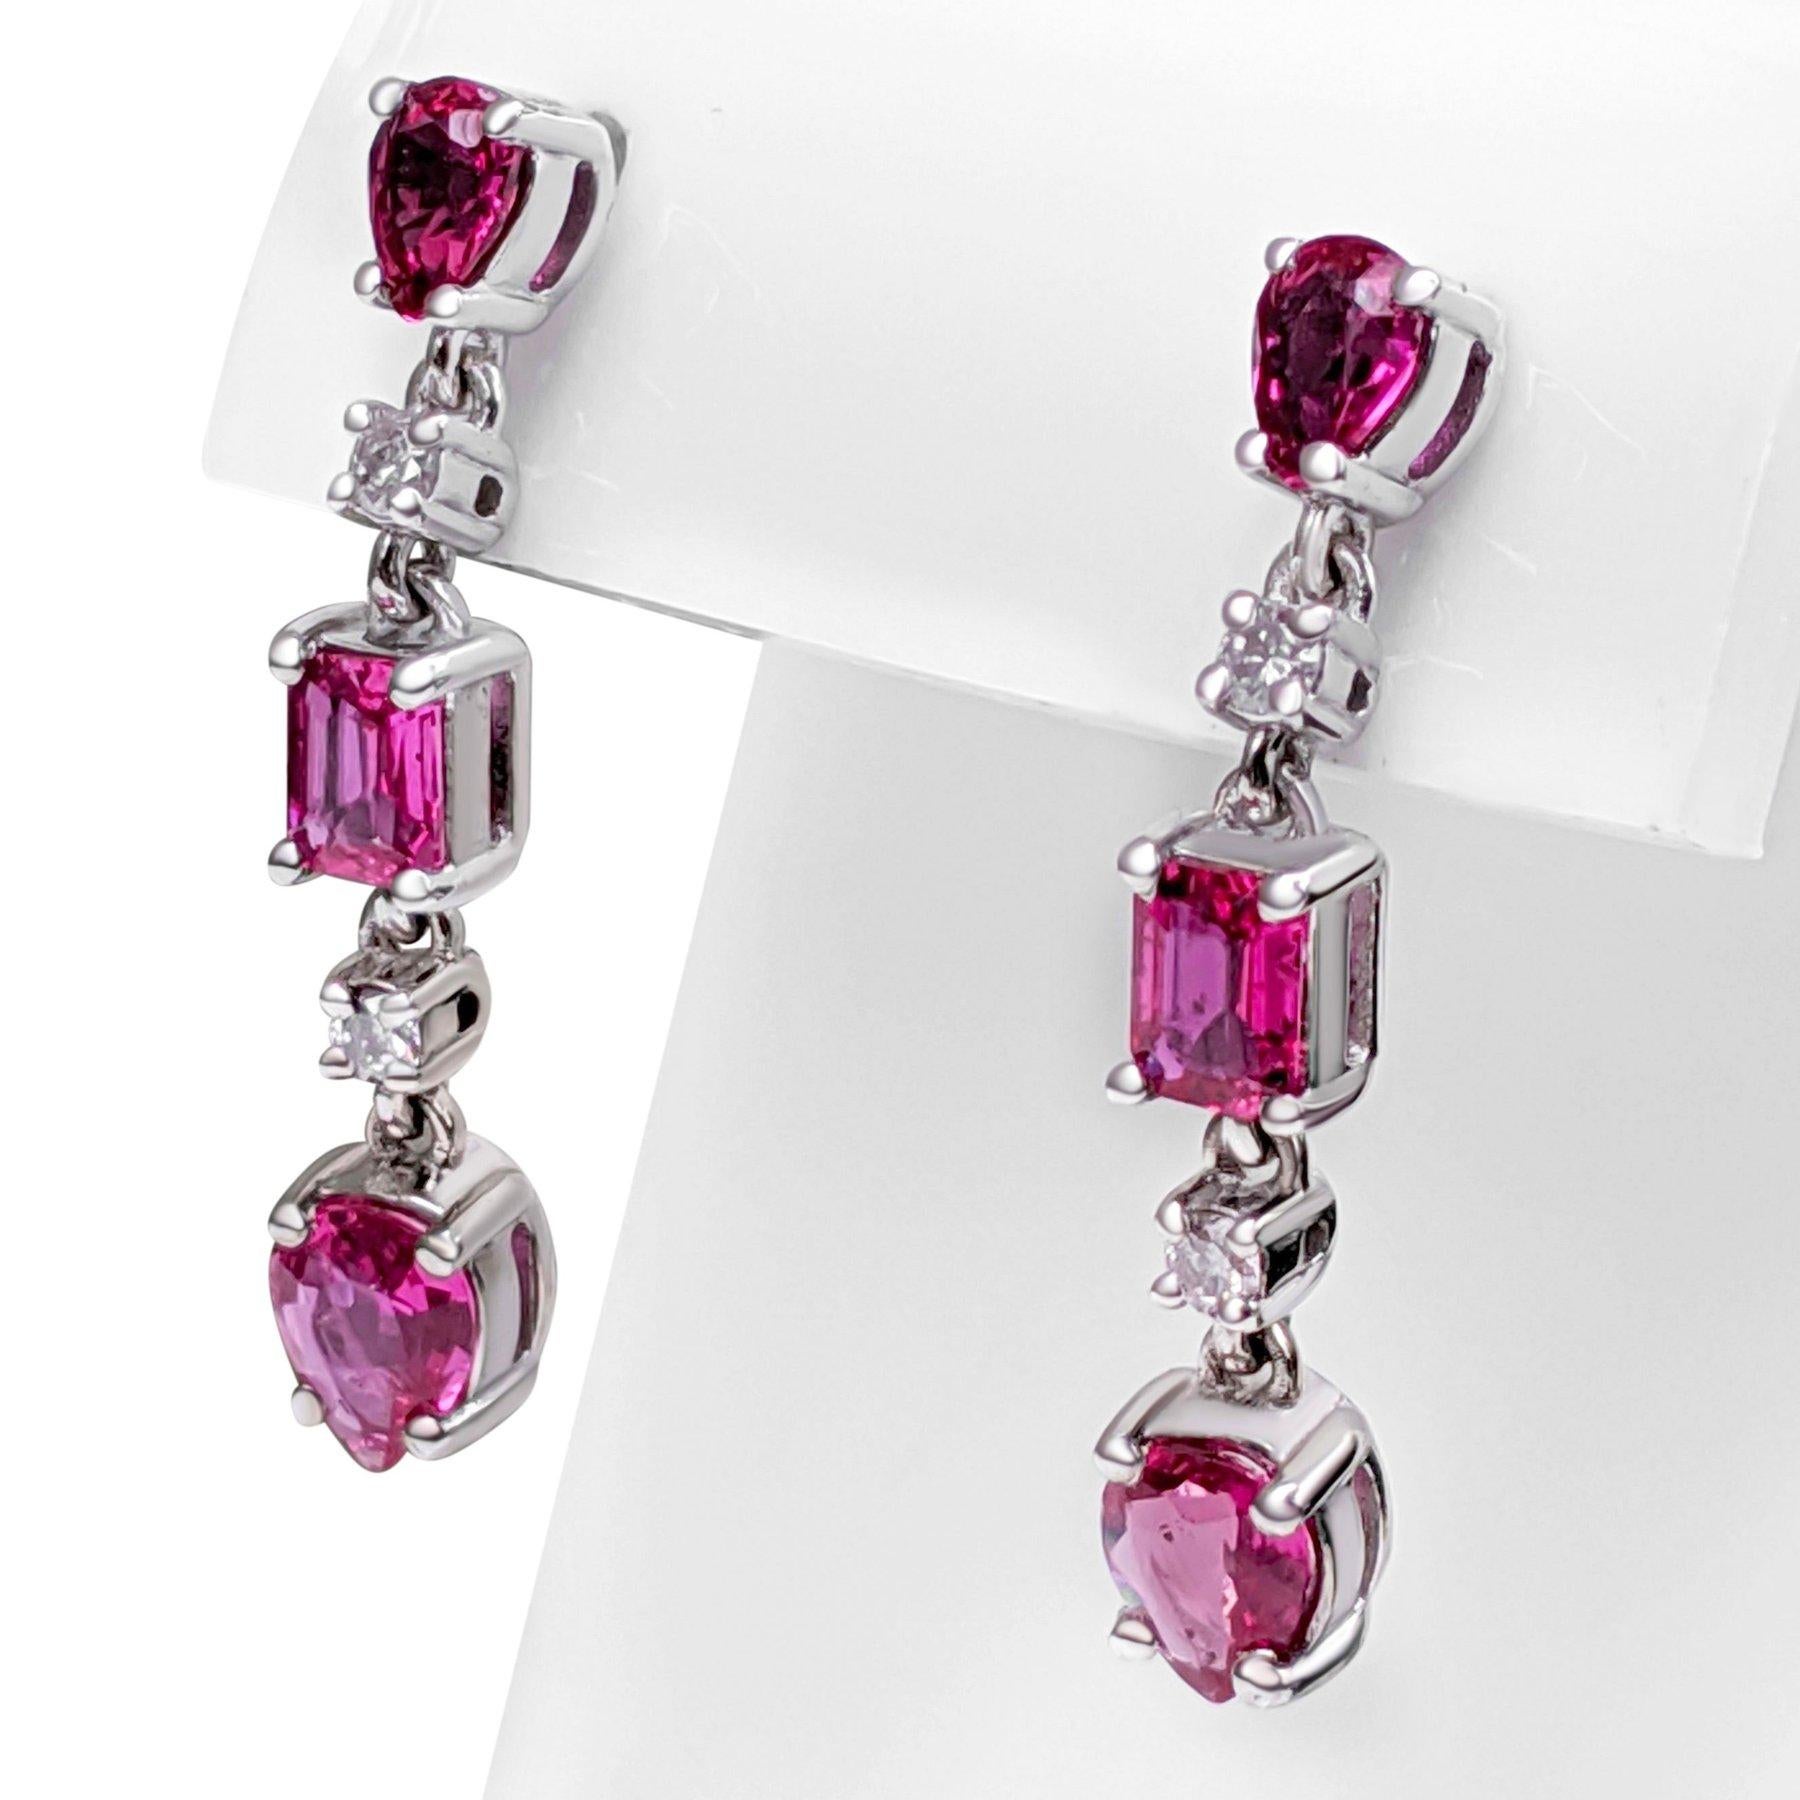 NO RESERVE! 1.23cttw NO HEAT Ruby & 0.08Ct Diamonds 14K White Gold Earrings For Sale 1